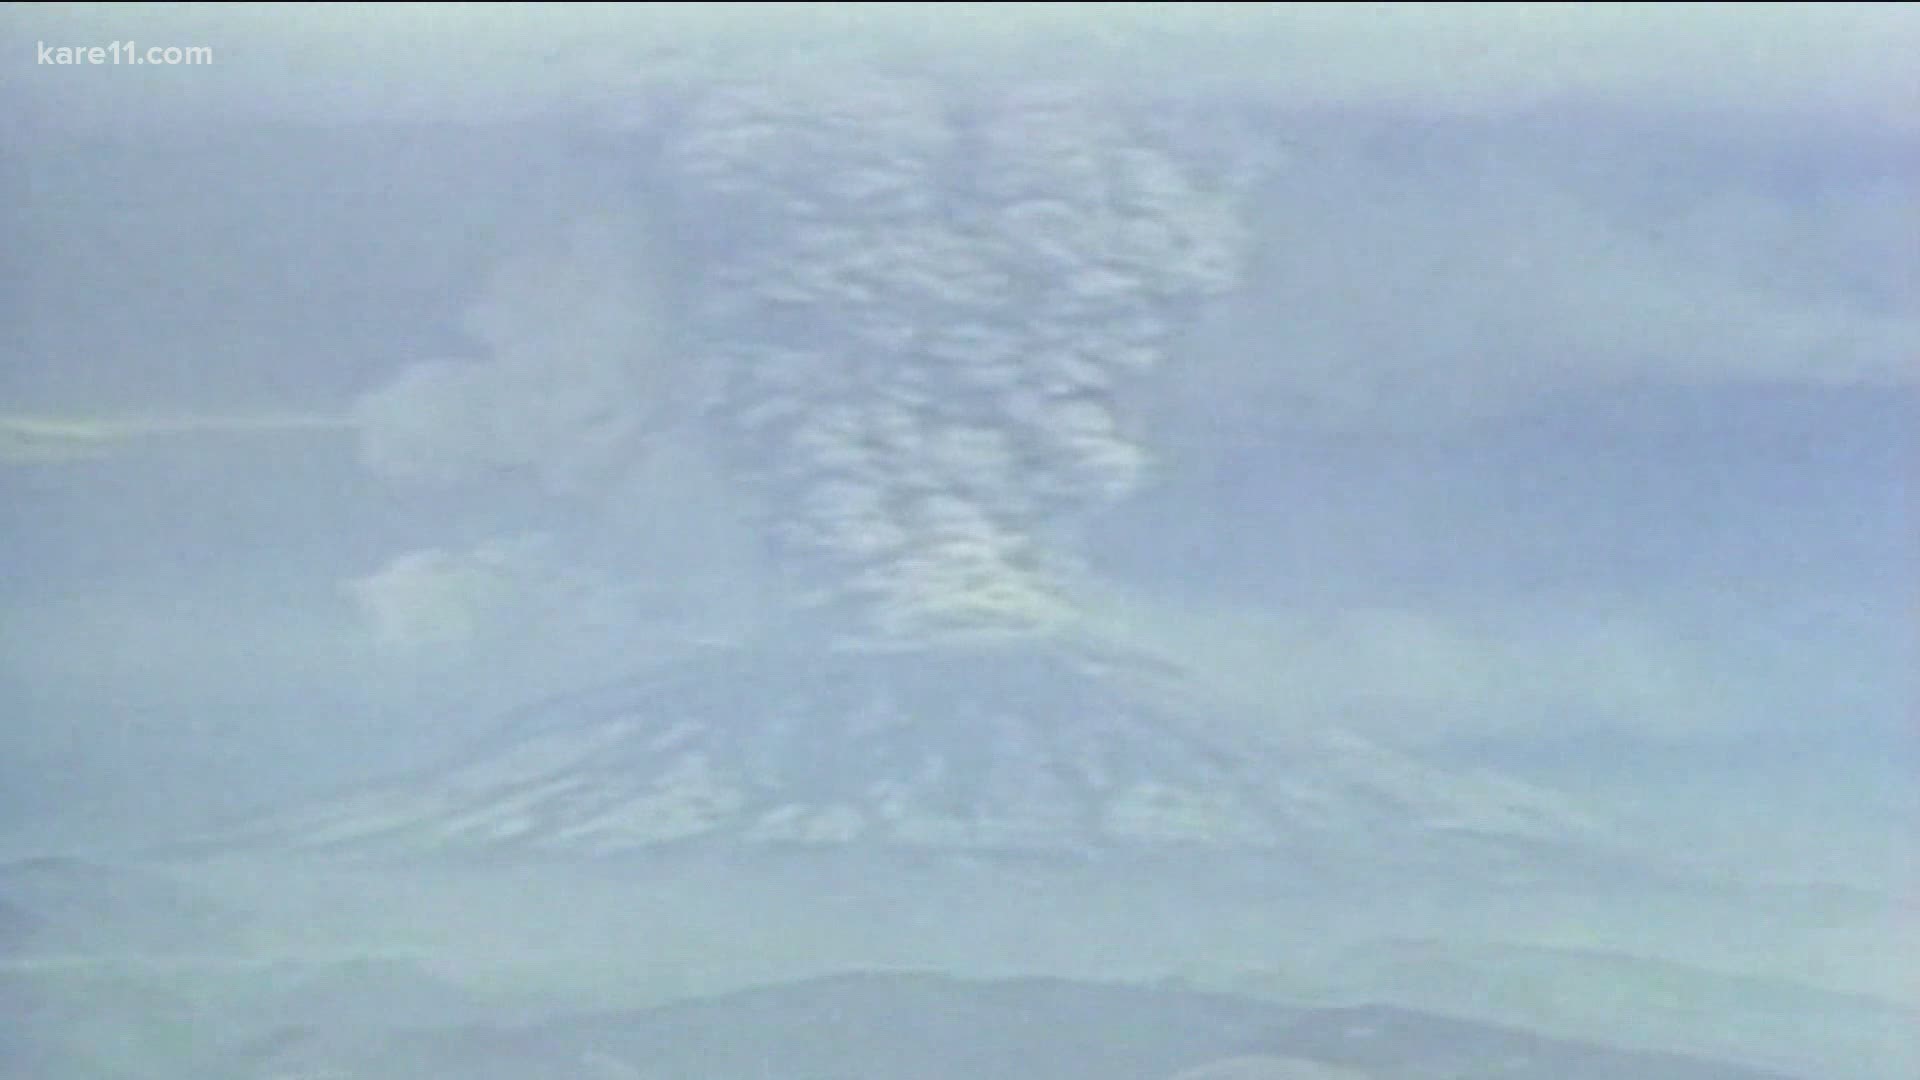 Forty one years ago, on May 18, 1980, Mount St. Helens erupted. It was the most devastating volcanic eruption in U.S history